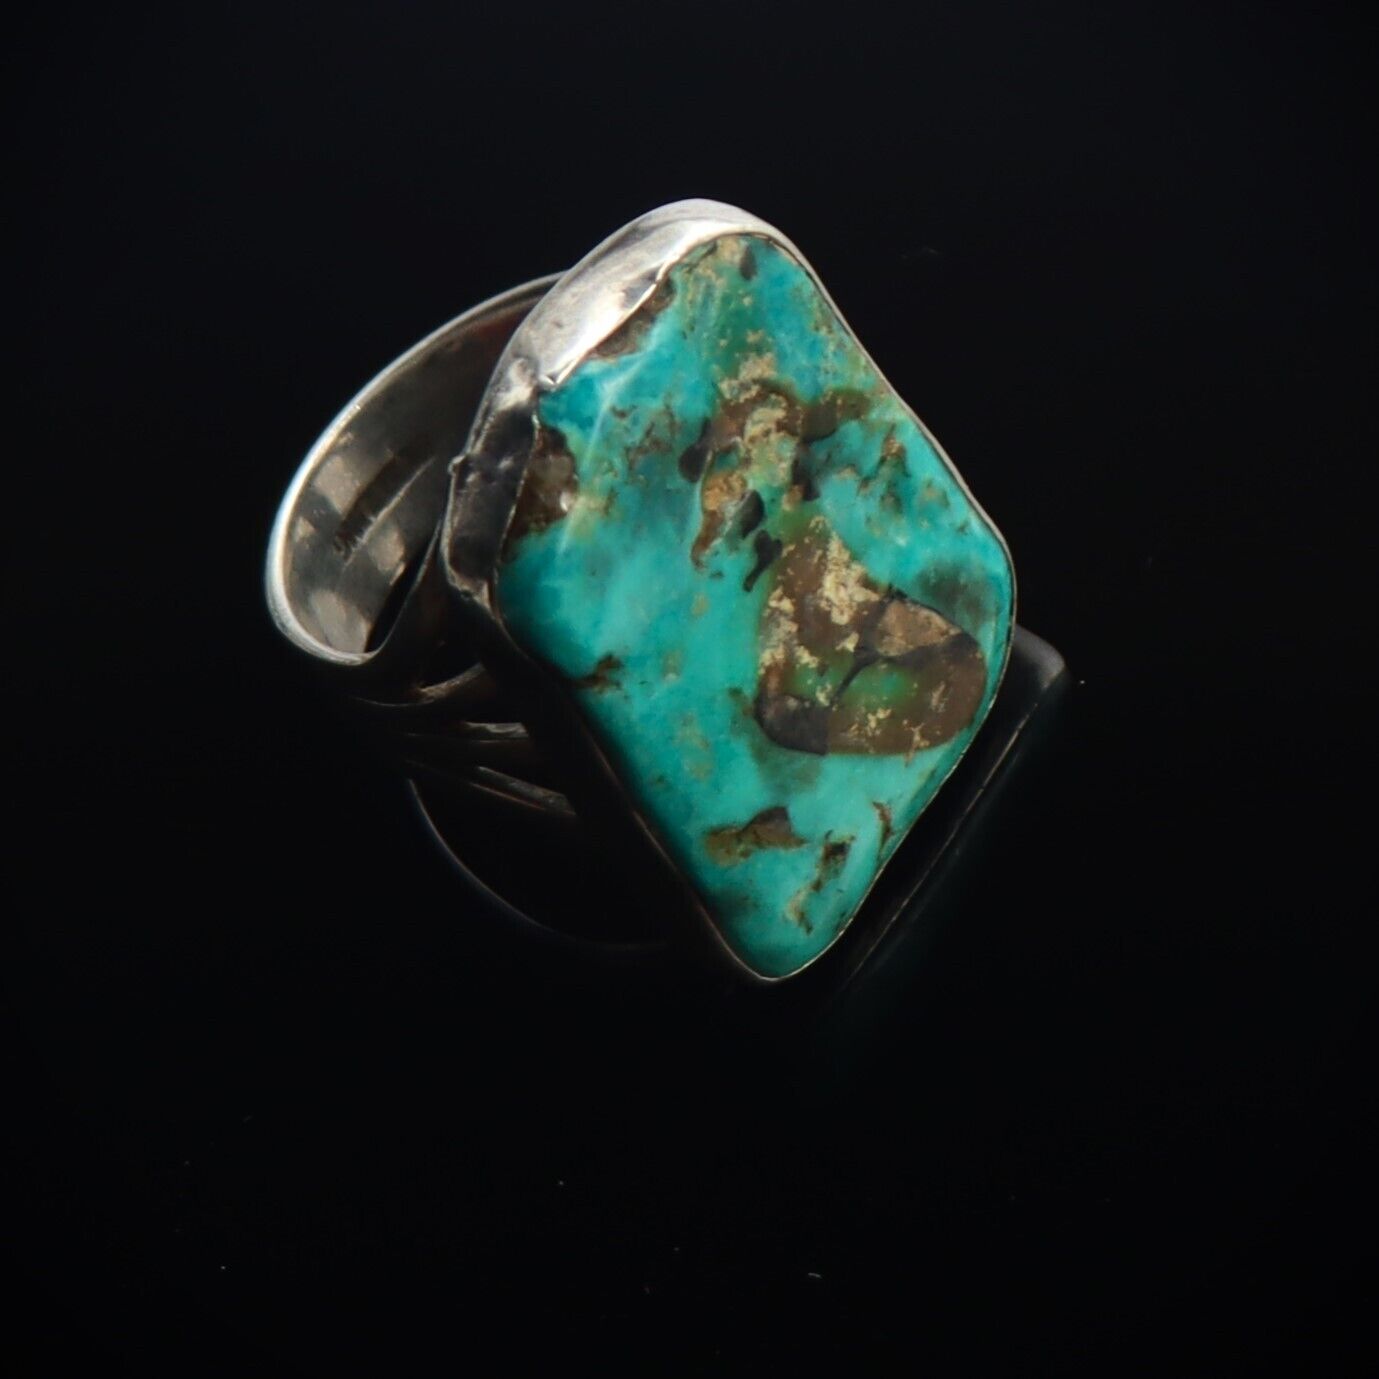 Vtg Old Pawn Sterling Silver Rough Natural Turquoise Slab Statement Ring sz9.75